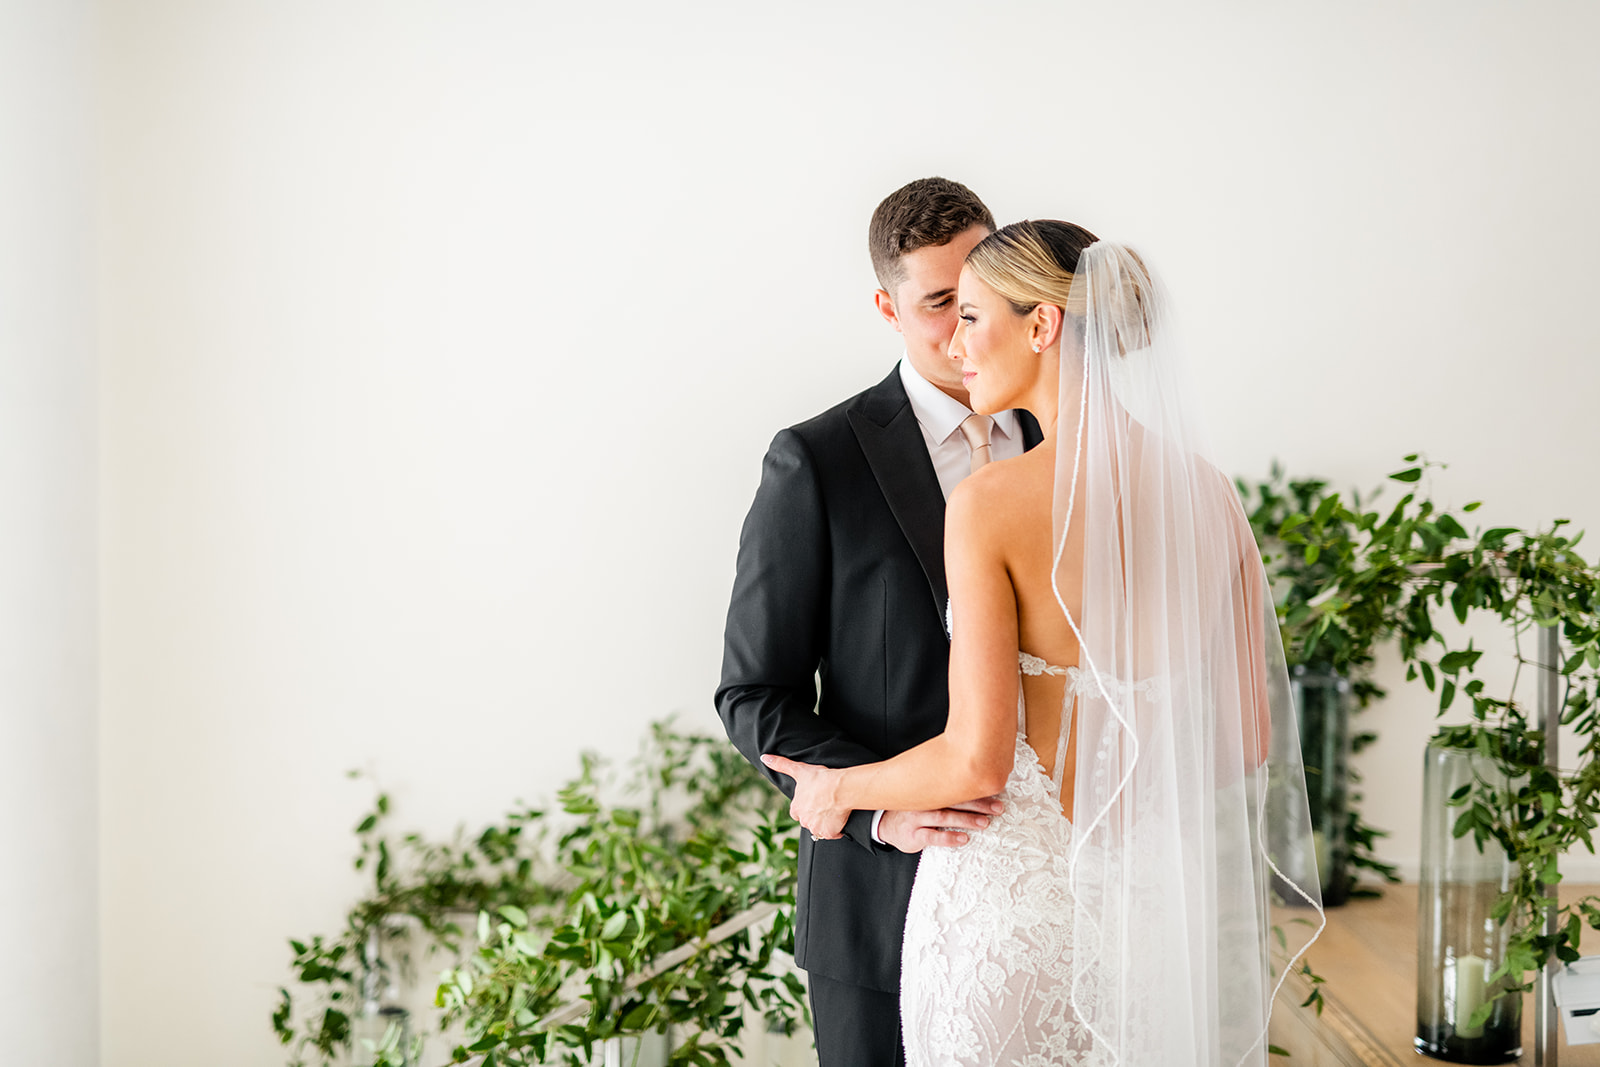 A still portrait of the bride and groom embracing each other with greenery behind them at Miami Beach Edition wedding, planned by Oh My Occasions